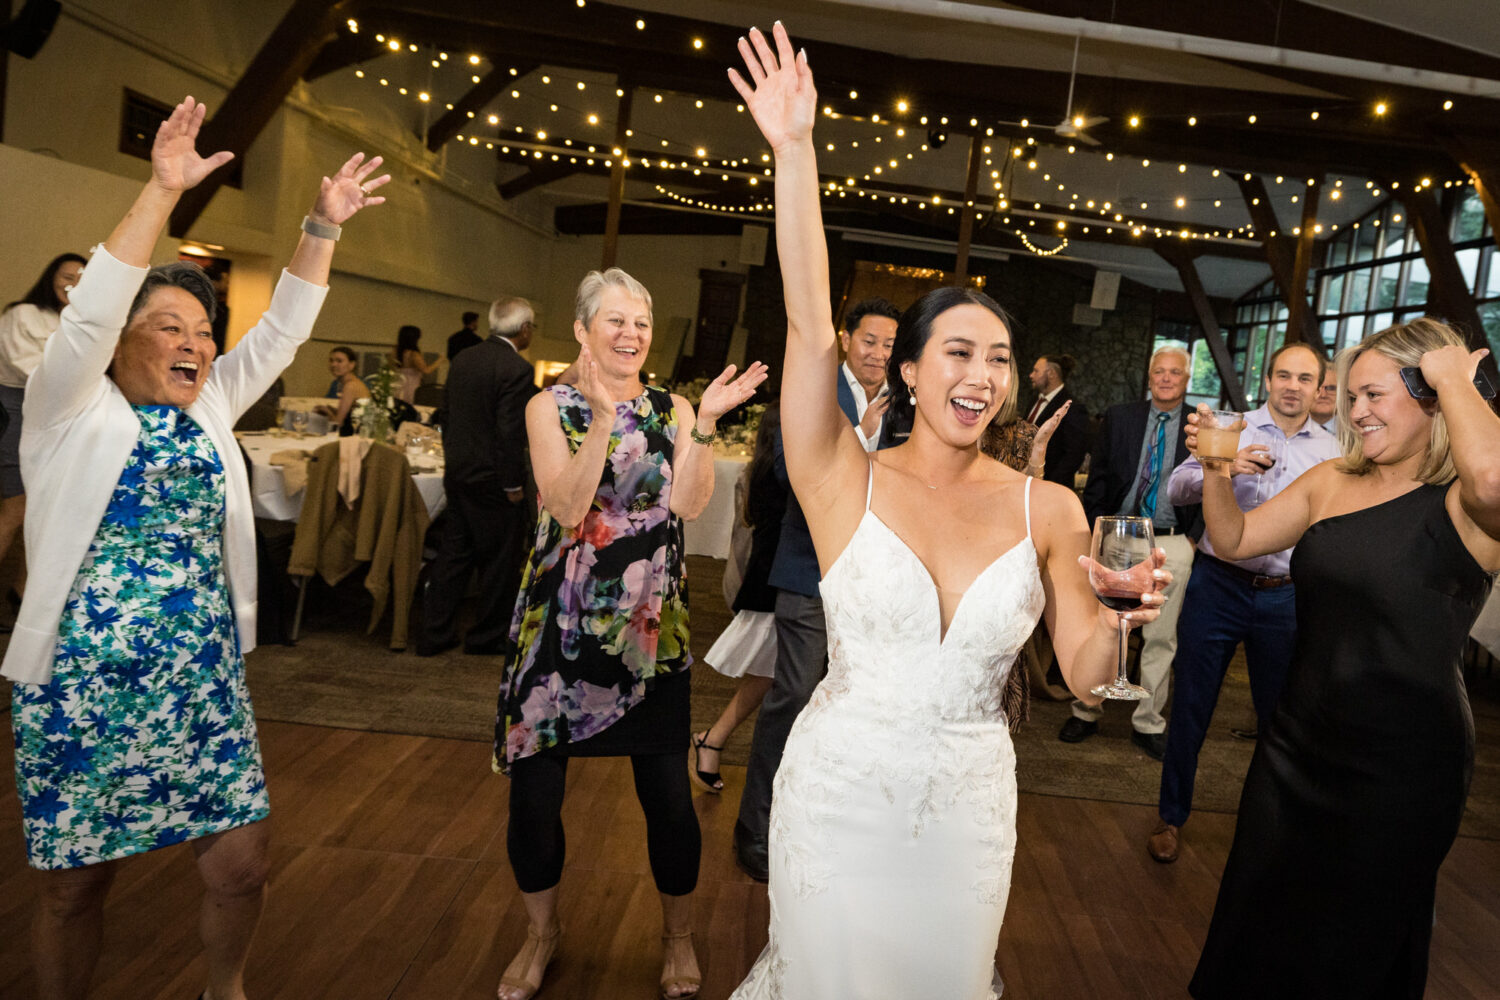 The bride and her wedding guests celebrate on the dance floor in the Palisades Events Center.